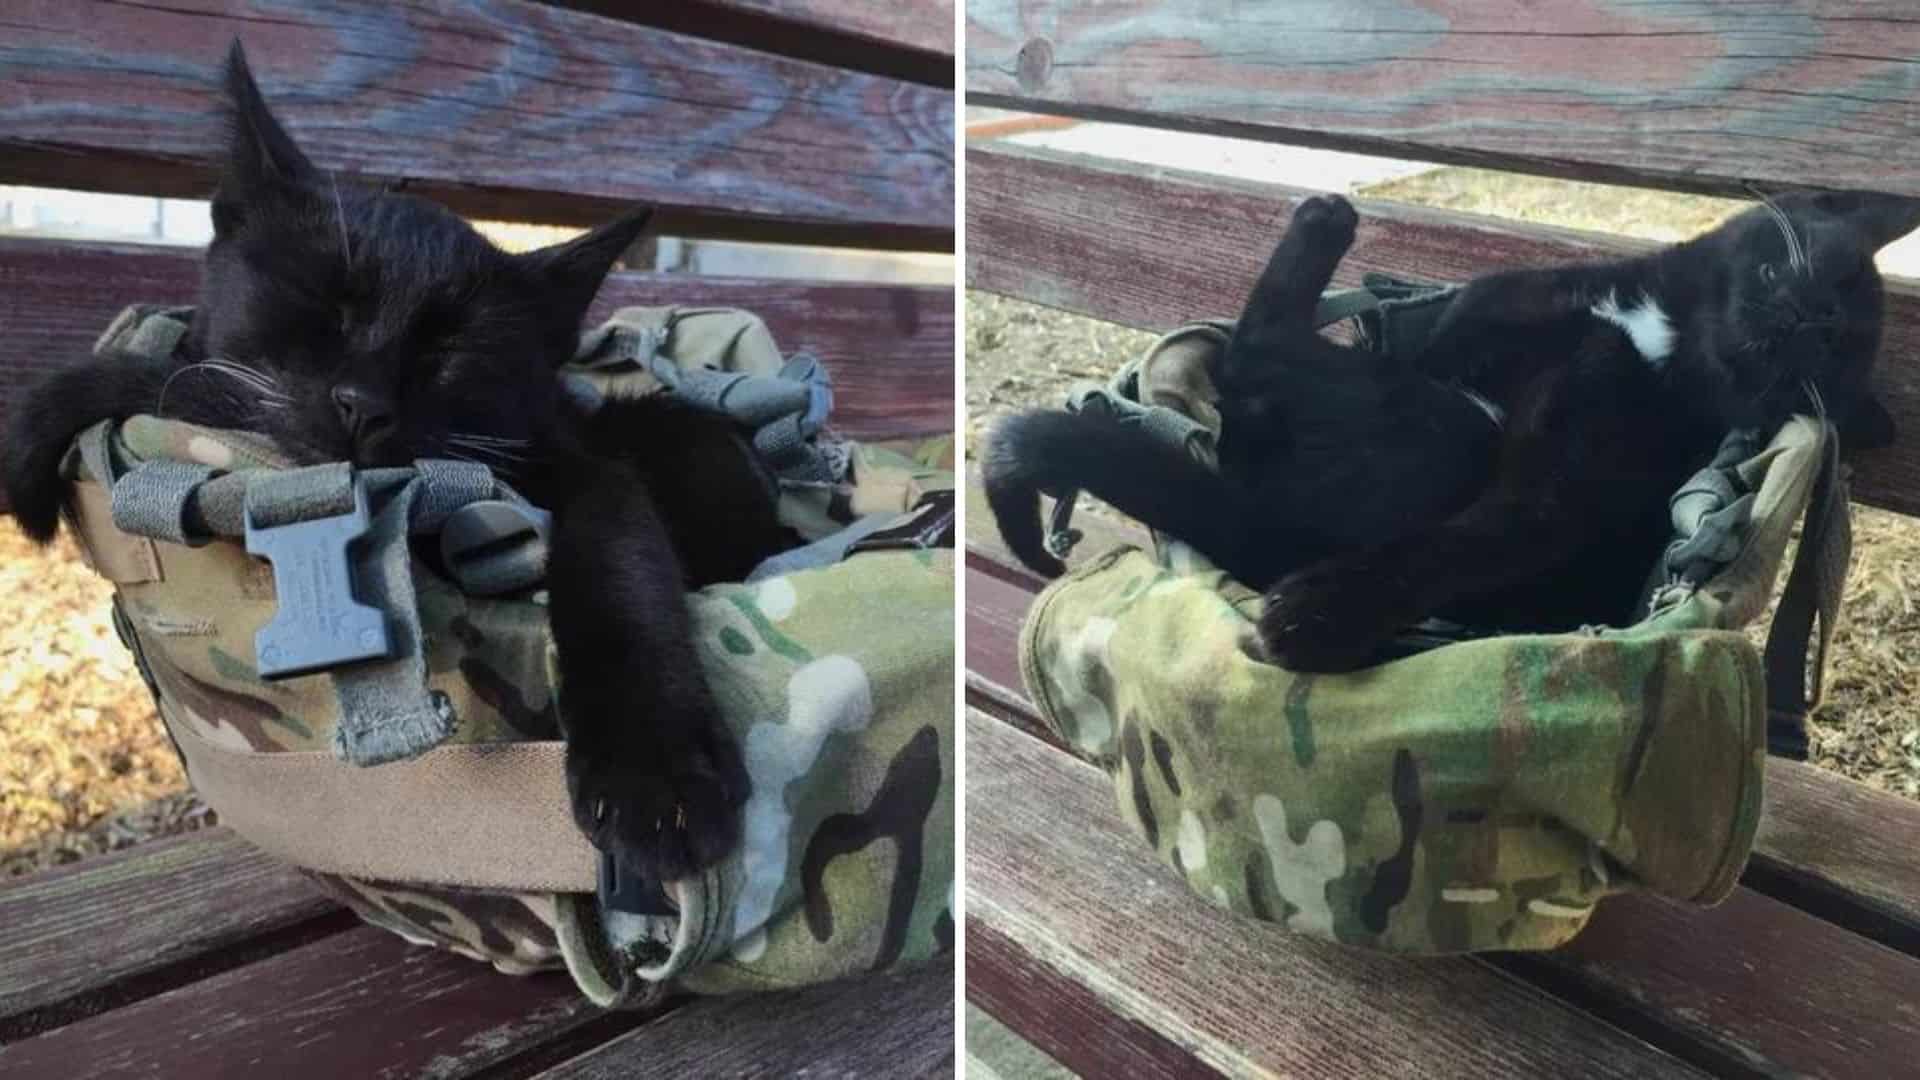 Stray Kitten Decides To Nap In A Military Helmet